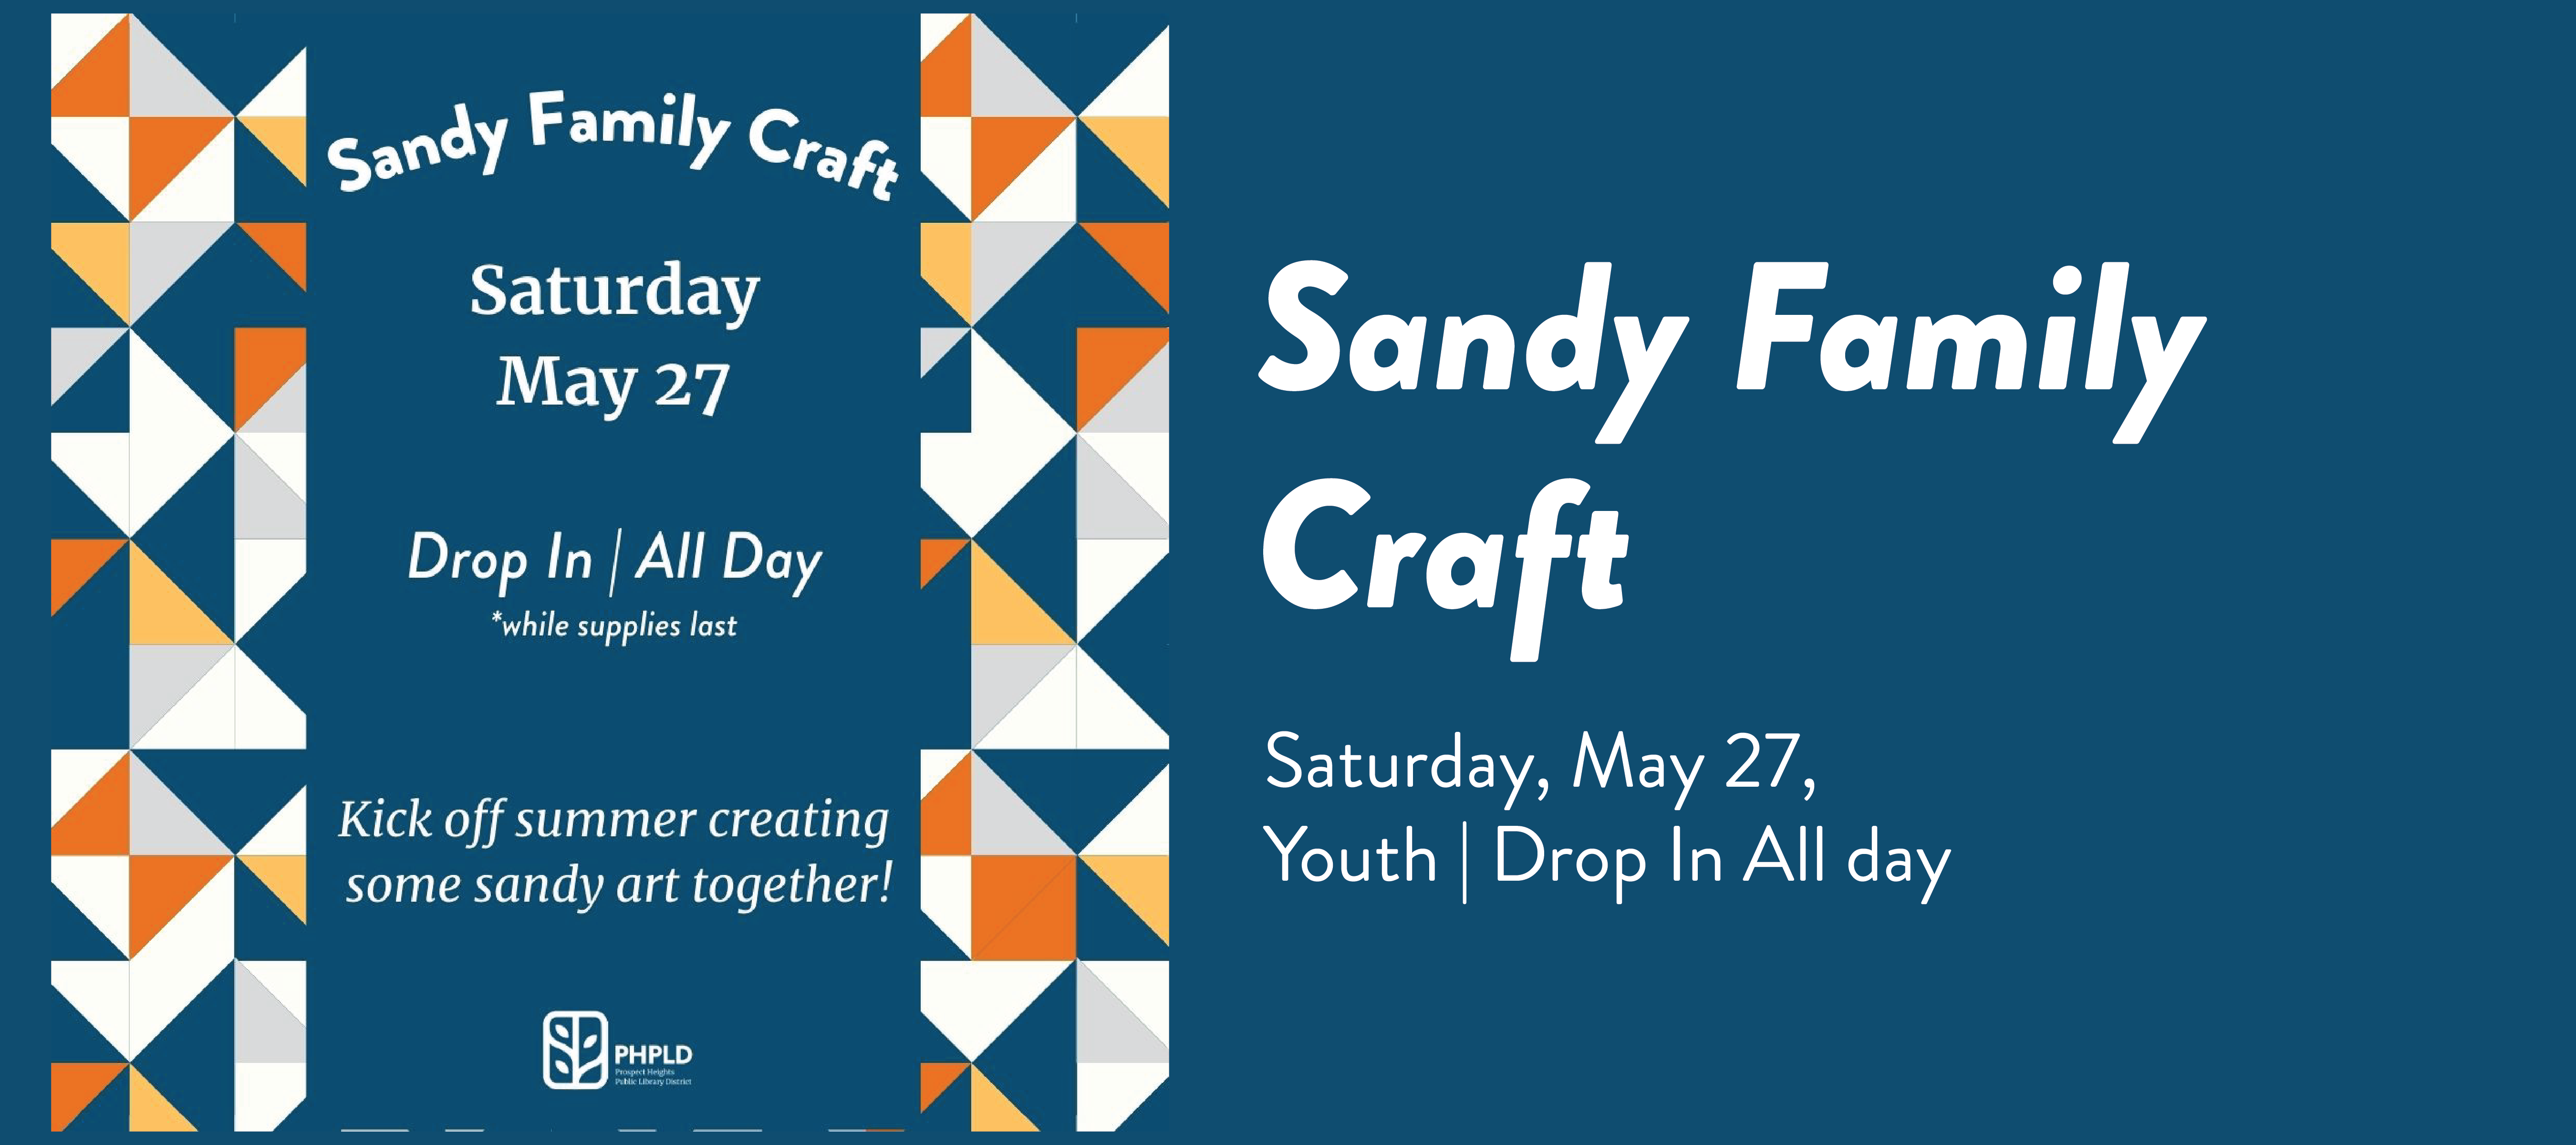 Sandy Family Craft, prospect heights public library, public library, prospect heights,